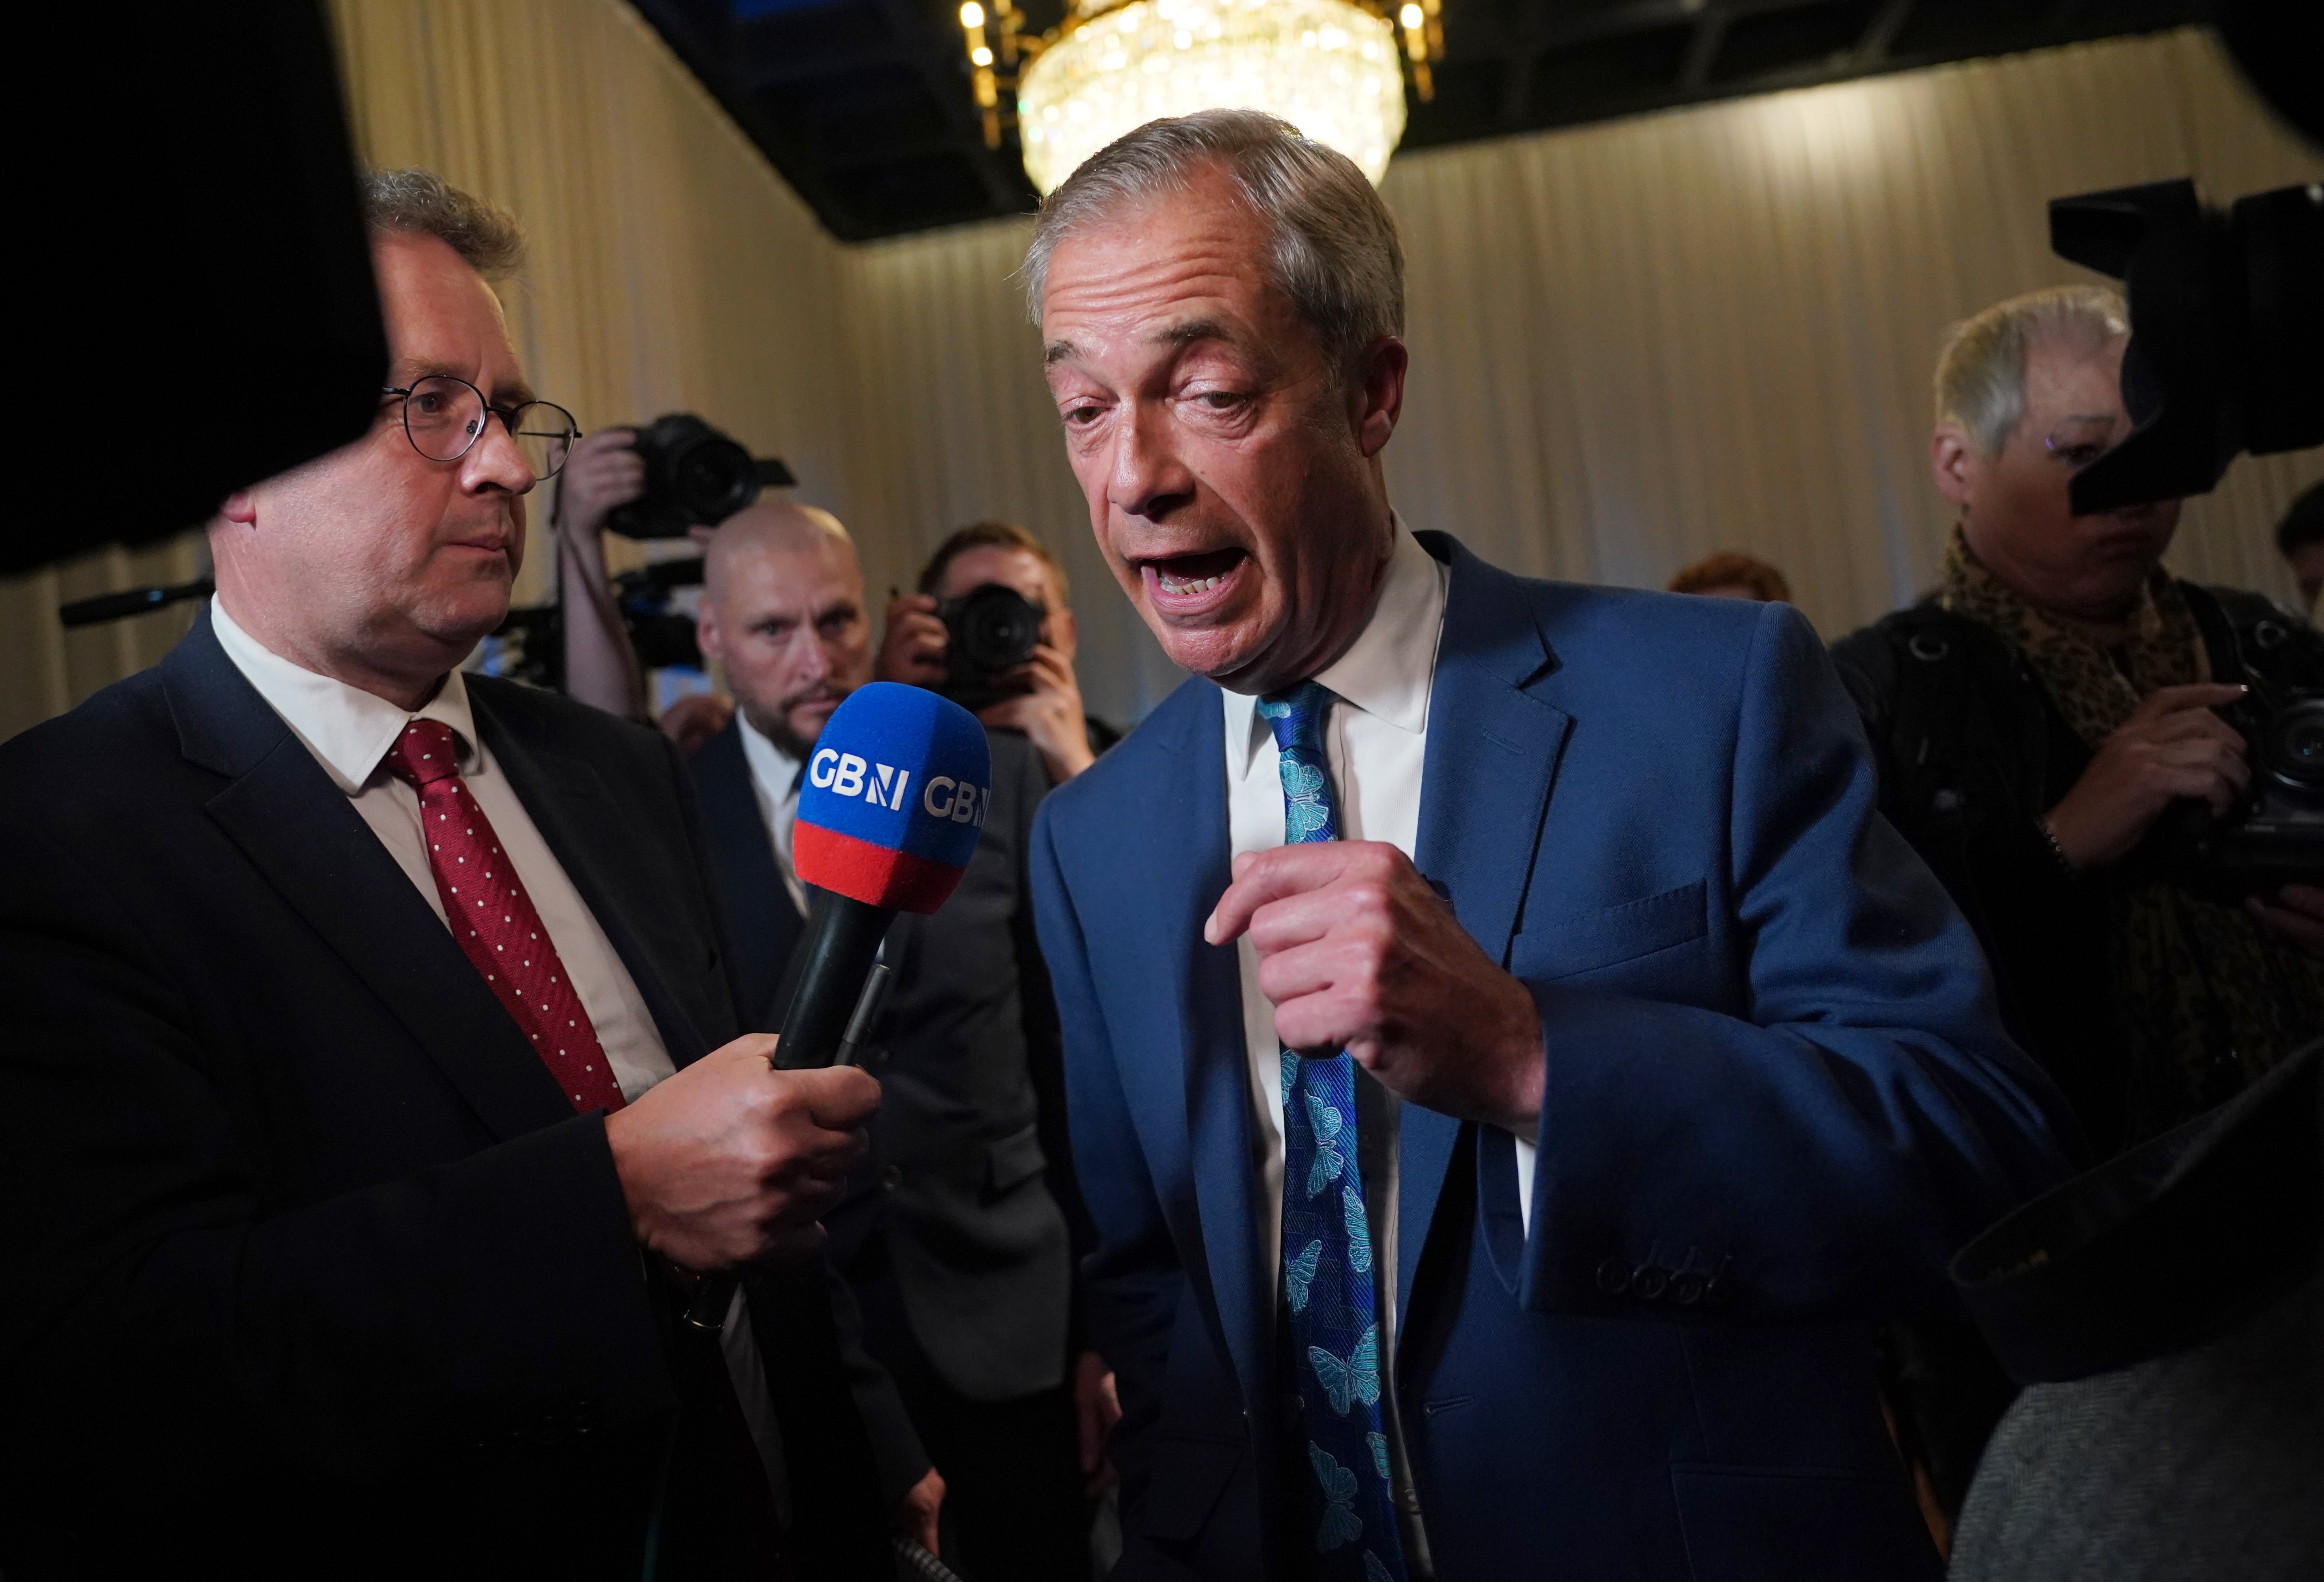 Nigel Farage is interviewed by GB News following a Reform UK press conference